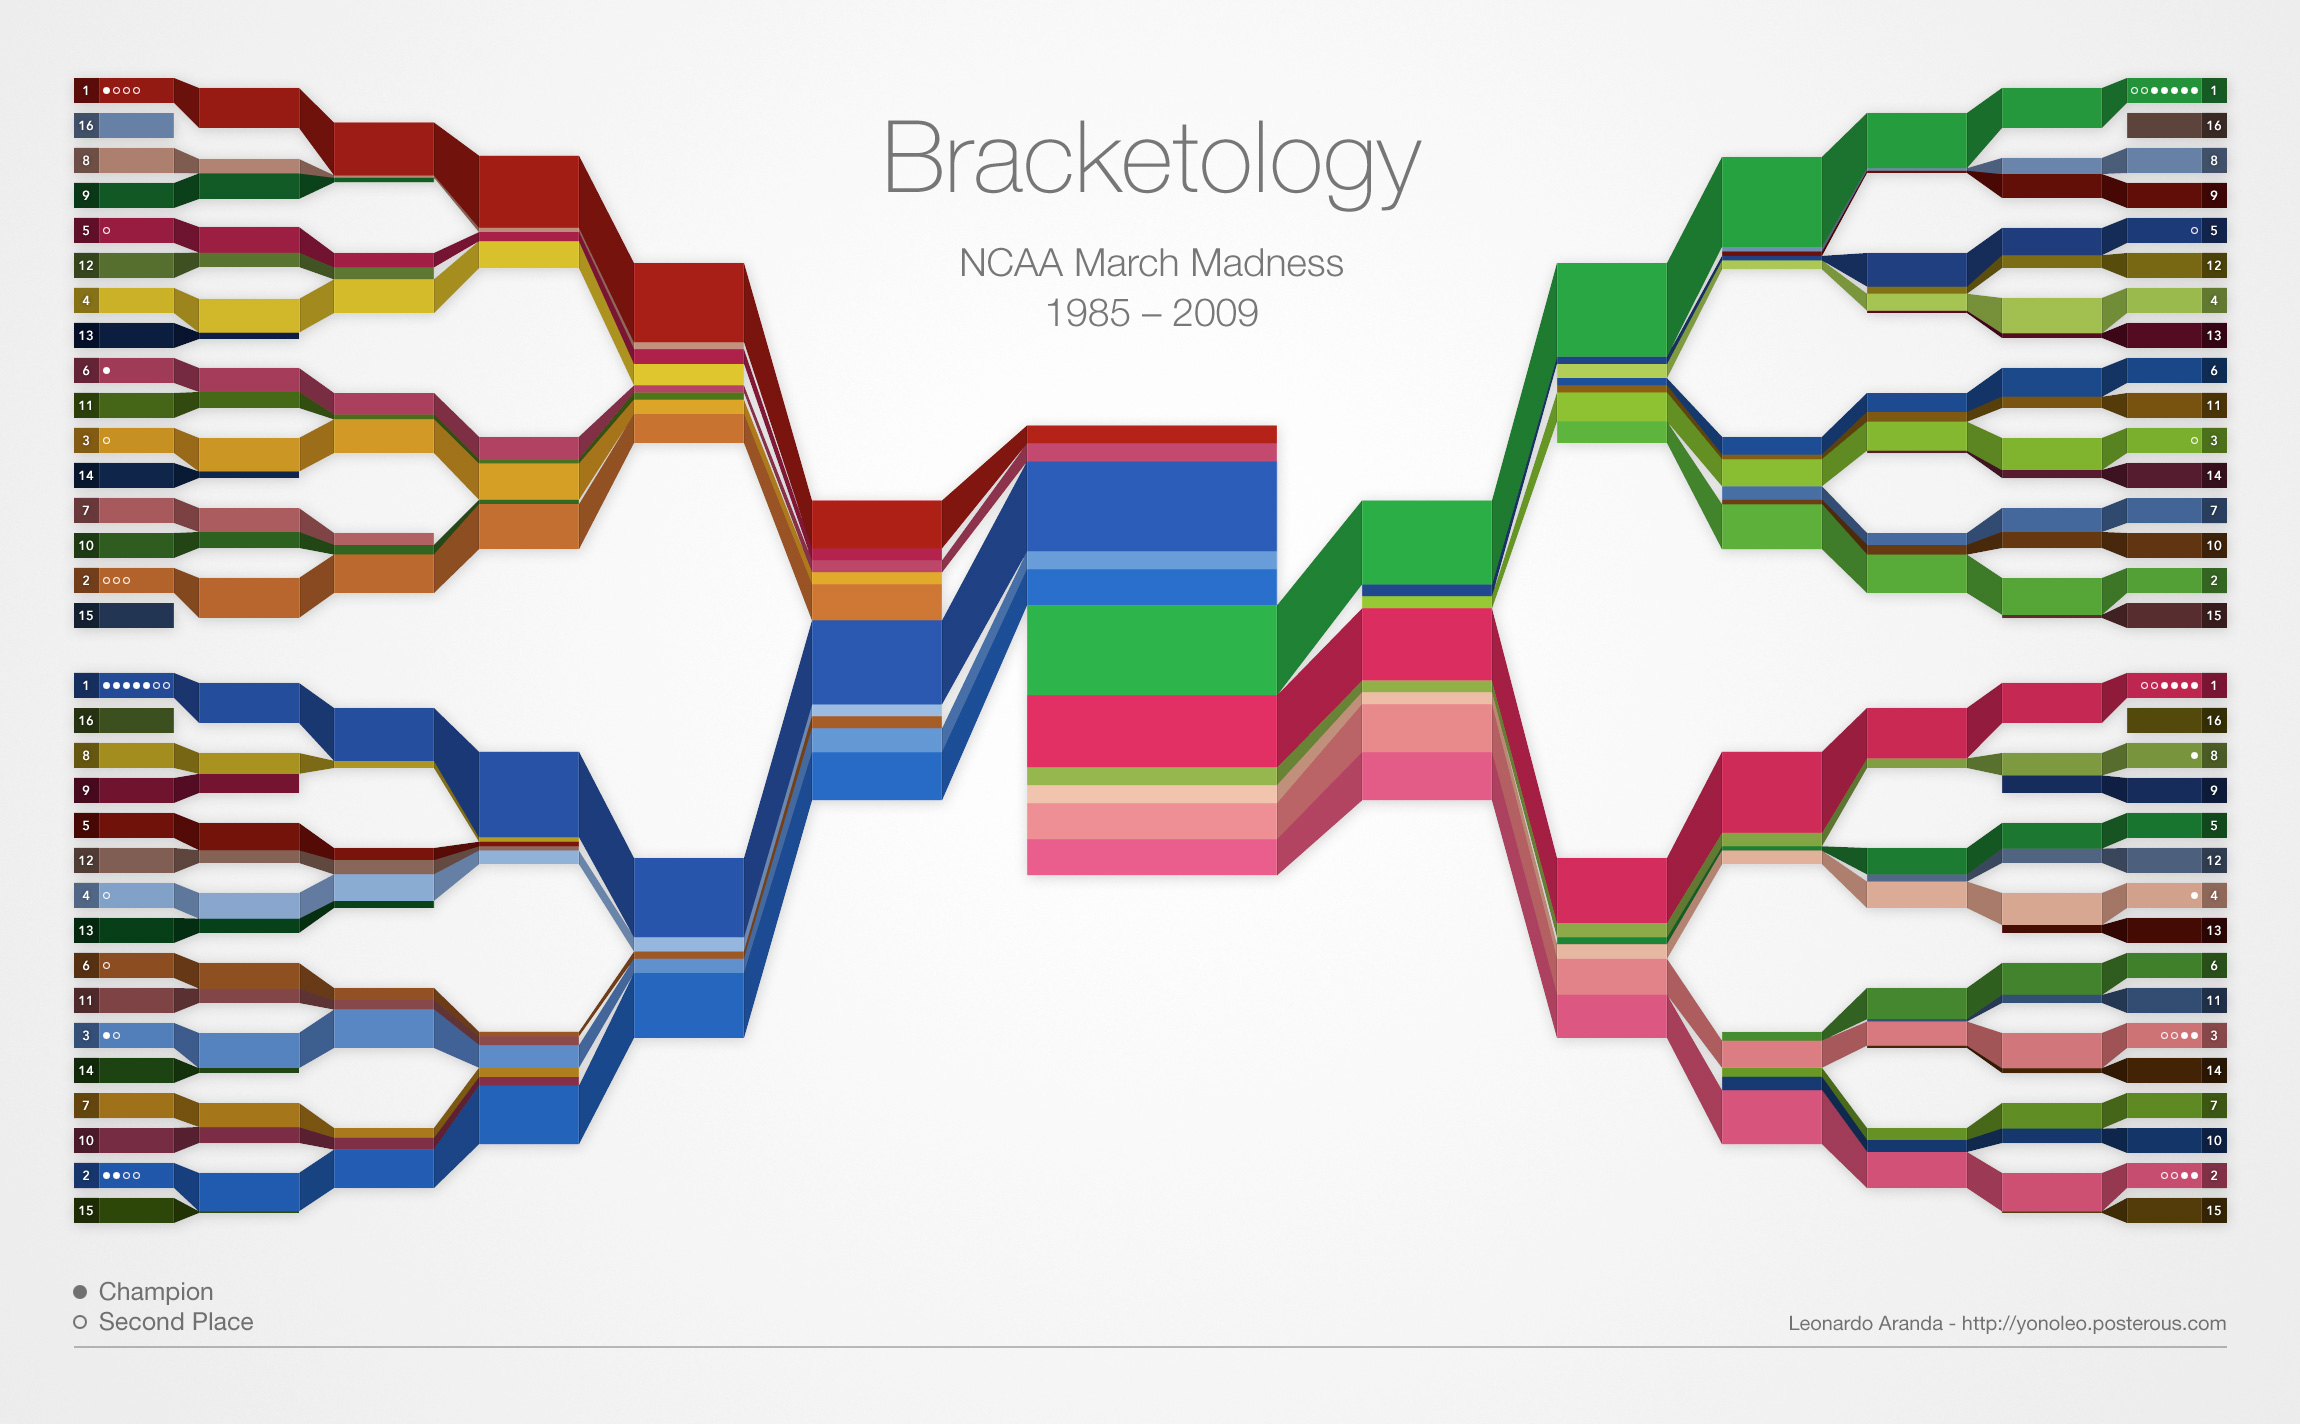 ncaa bracket is a queue, another type of waiting line